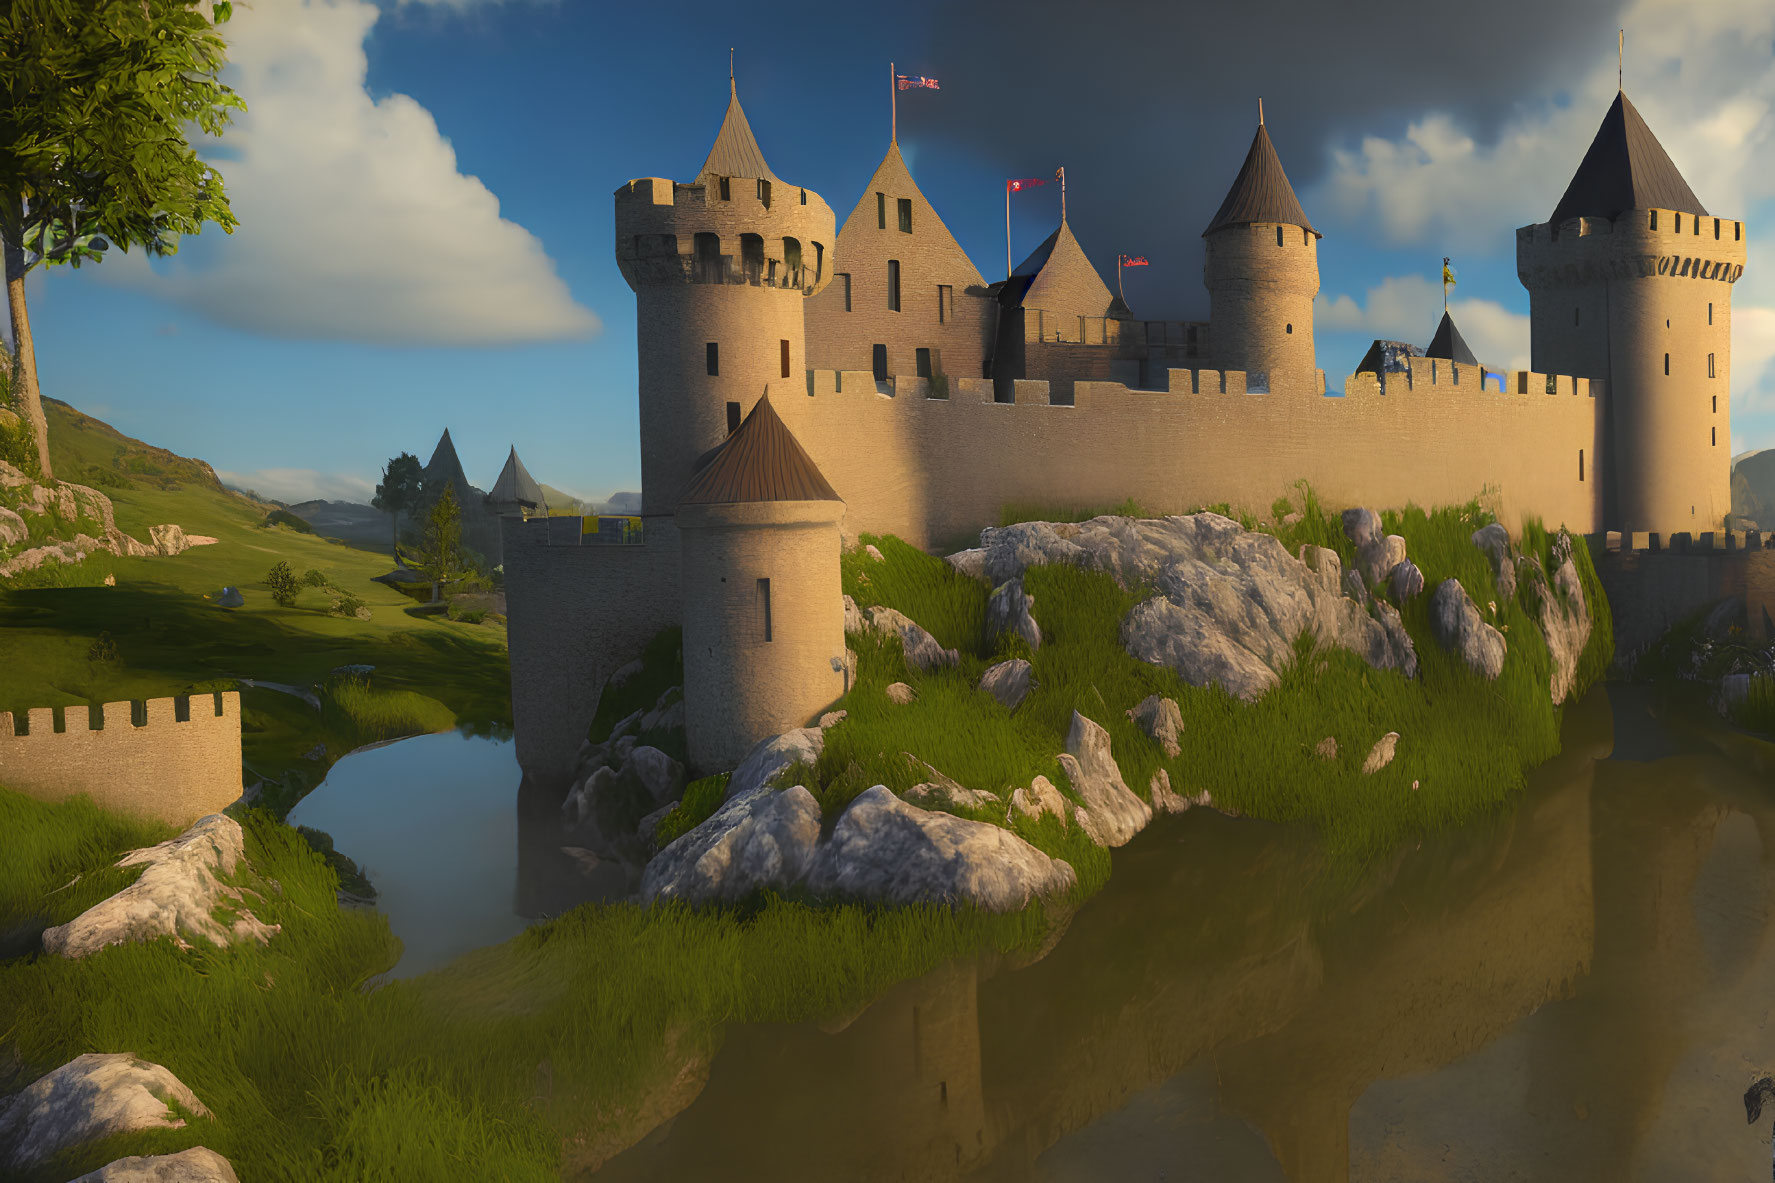 Majestic castle with turrets and flags in verdant landscape reflected in calm waters